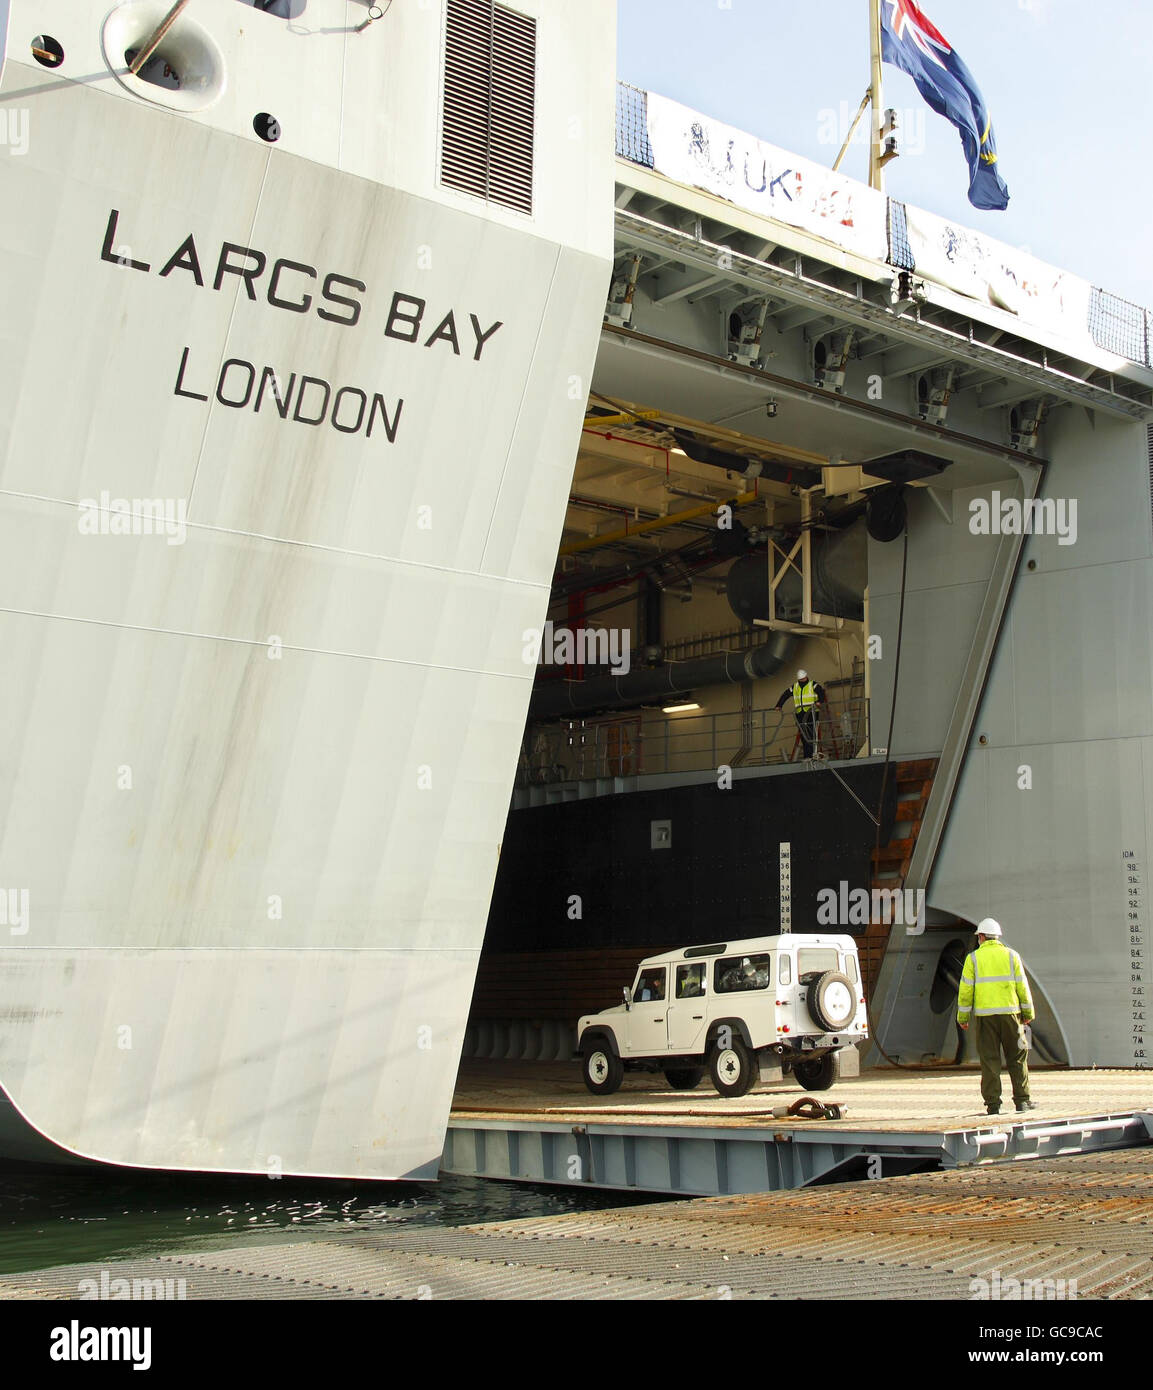 A Land Rover, part of a cargo of humanitarian aid bound for Haiti, being loaded onto the Royal Fleet Auxiliary (RFA) Largs Bay at the Sea Mounting Centre in Marchwood near Southampton. Stock Photo